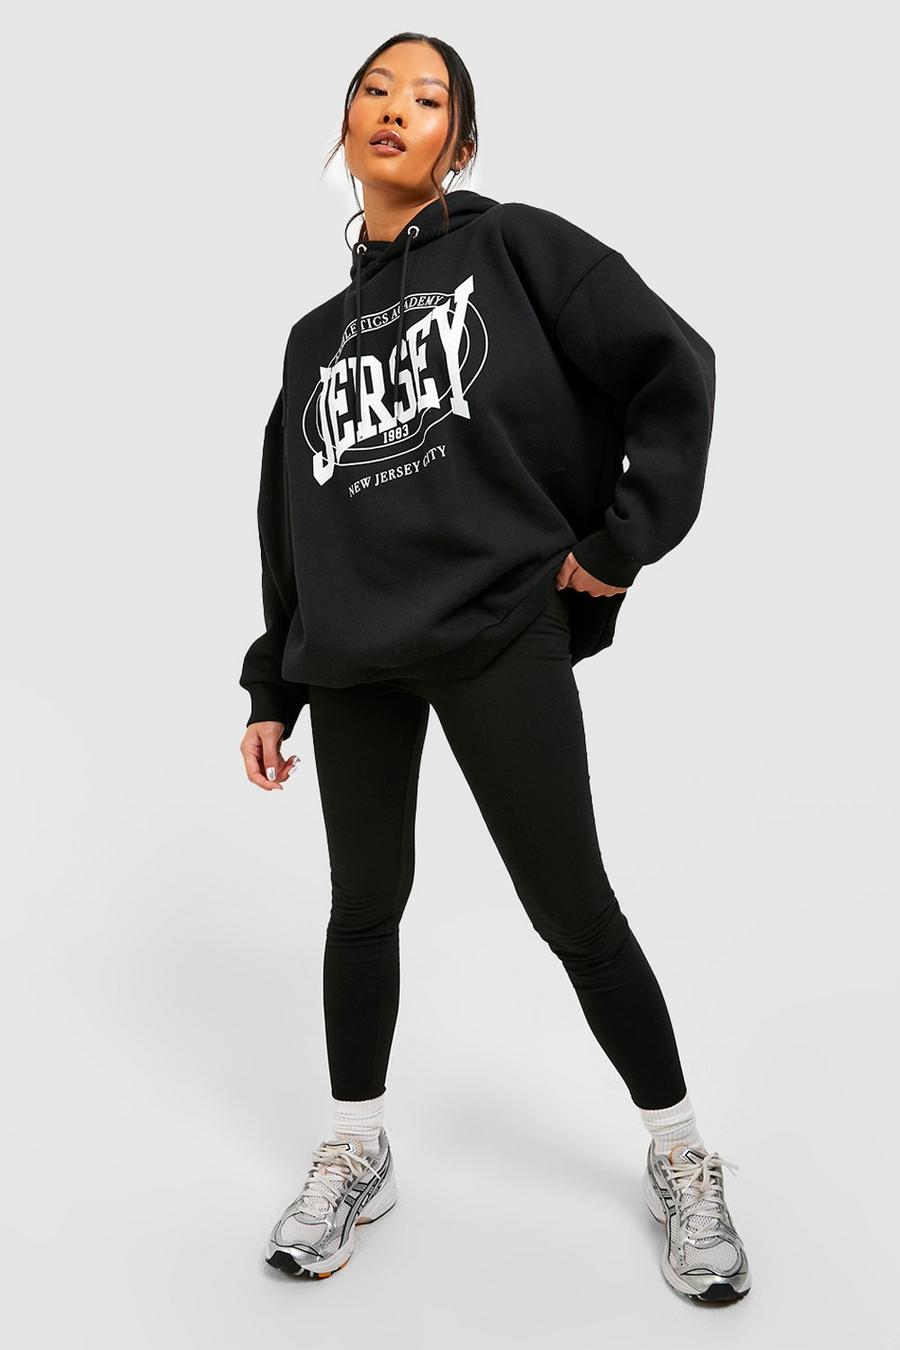 Oversized Sweatshirts Over Leggings Women's  International Society of  Precision Agriculture